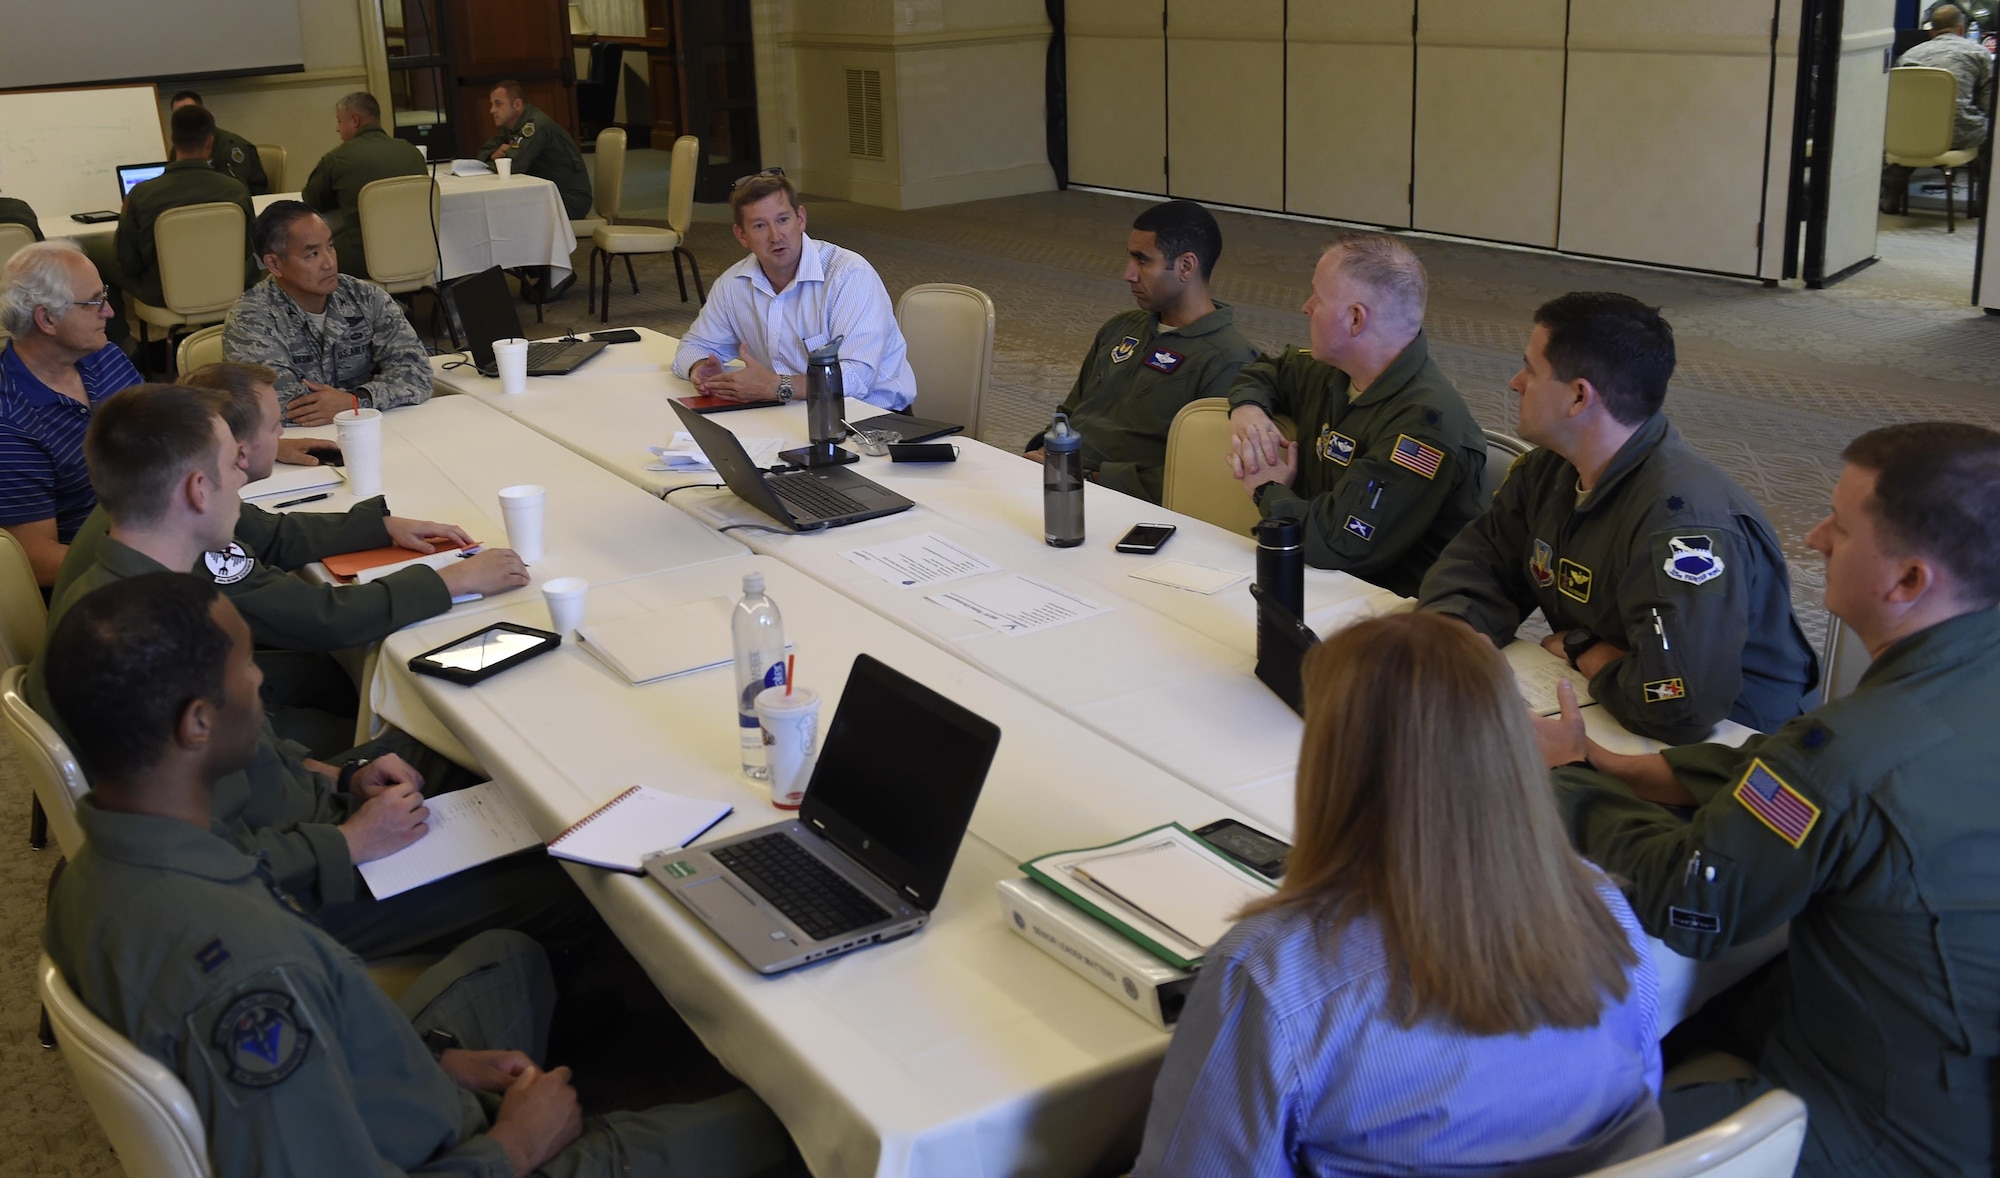 Lt. Col. Langdon Root, Aircrew Crisis Task Force Summit lead, conducts a briefing Aug. 15 during a two-week aircrew retention summit here as part of a holistic approach to improve readiness and capacity by increasing retention of experienced aviators.